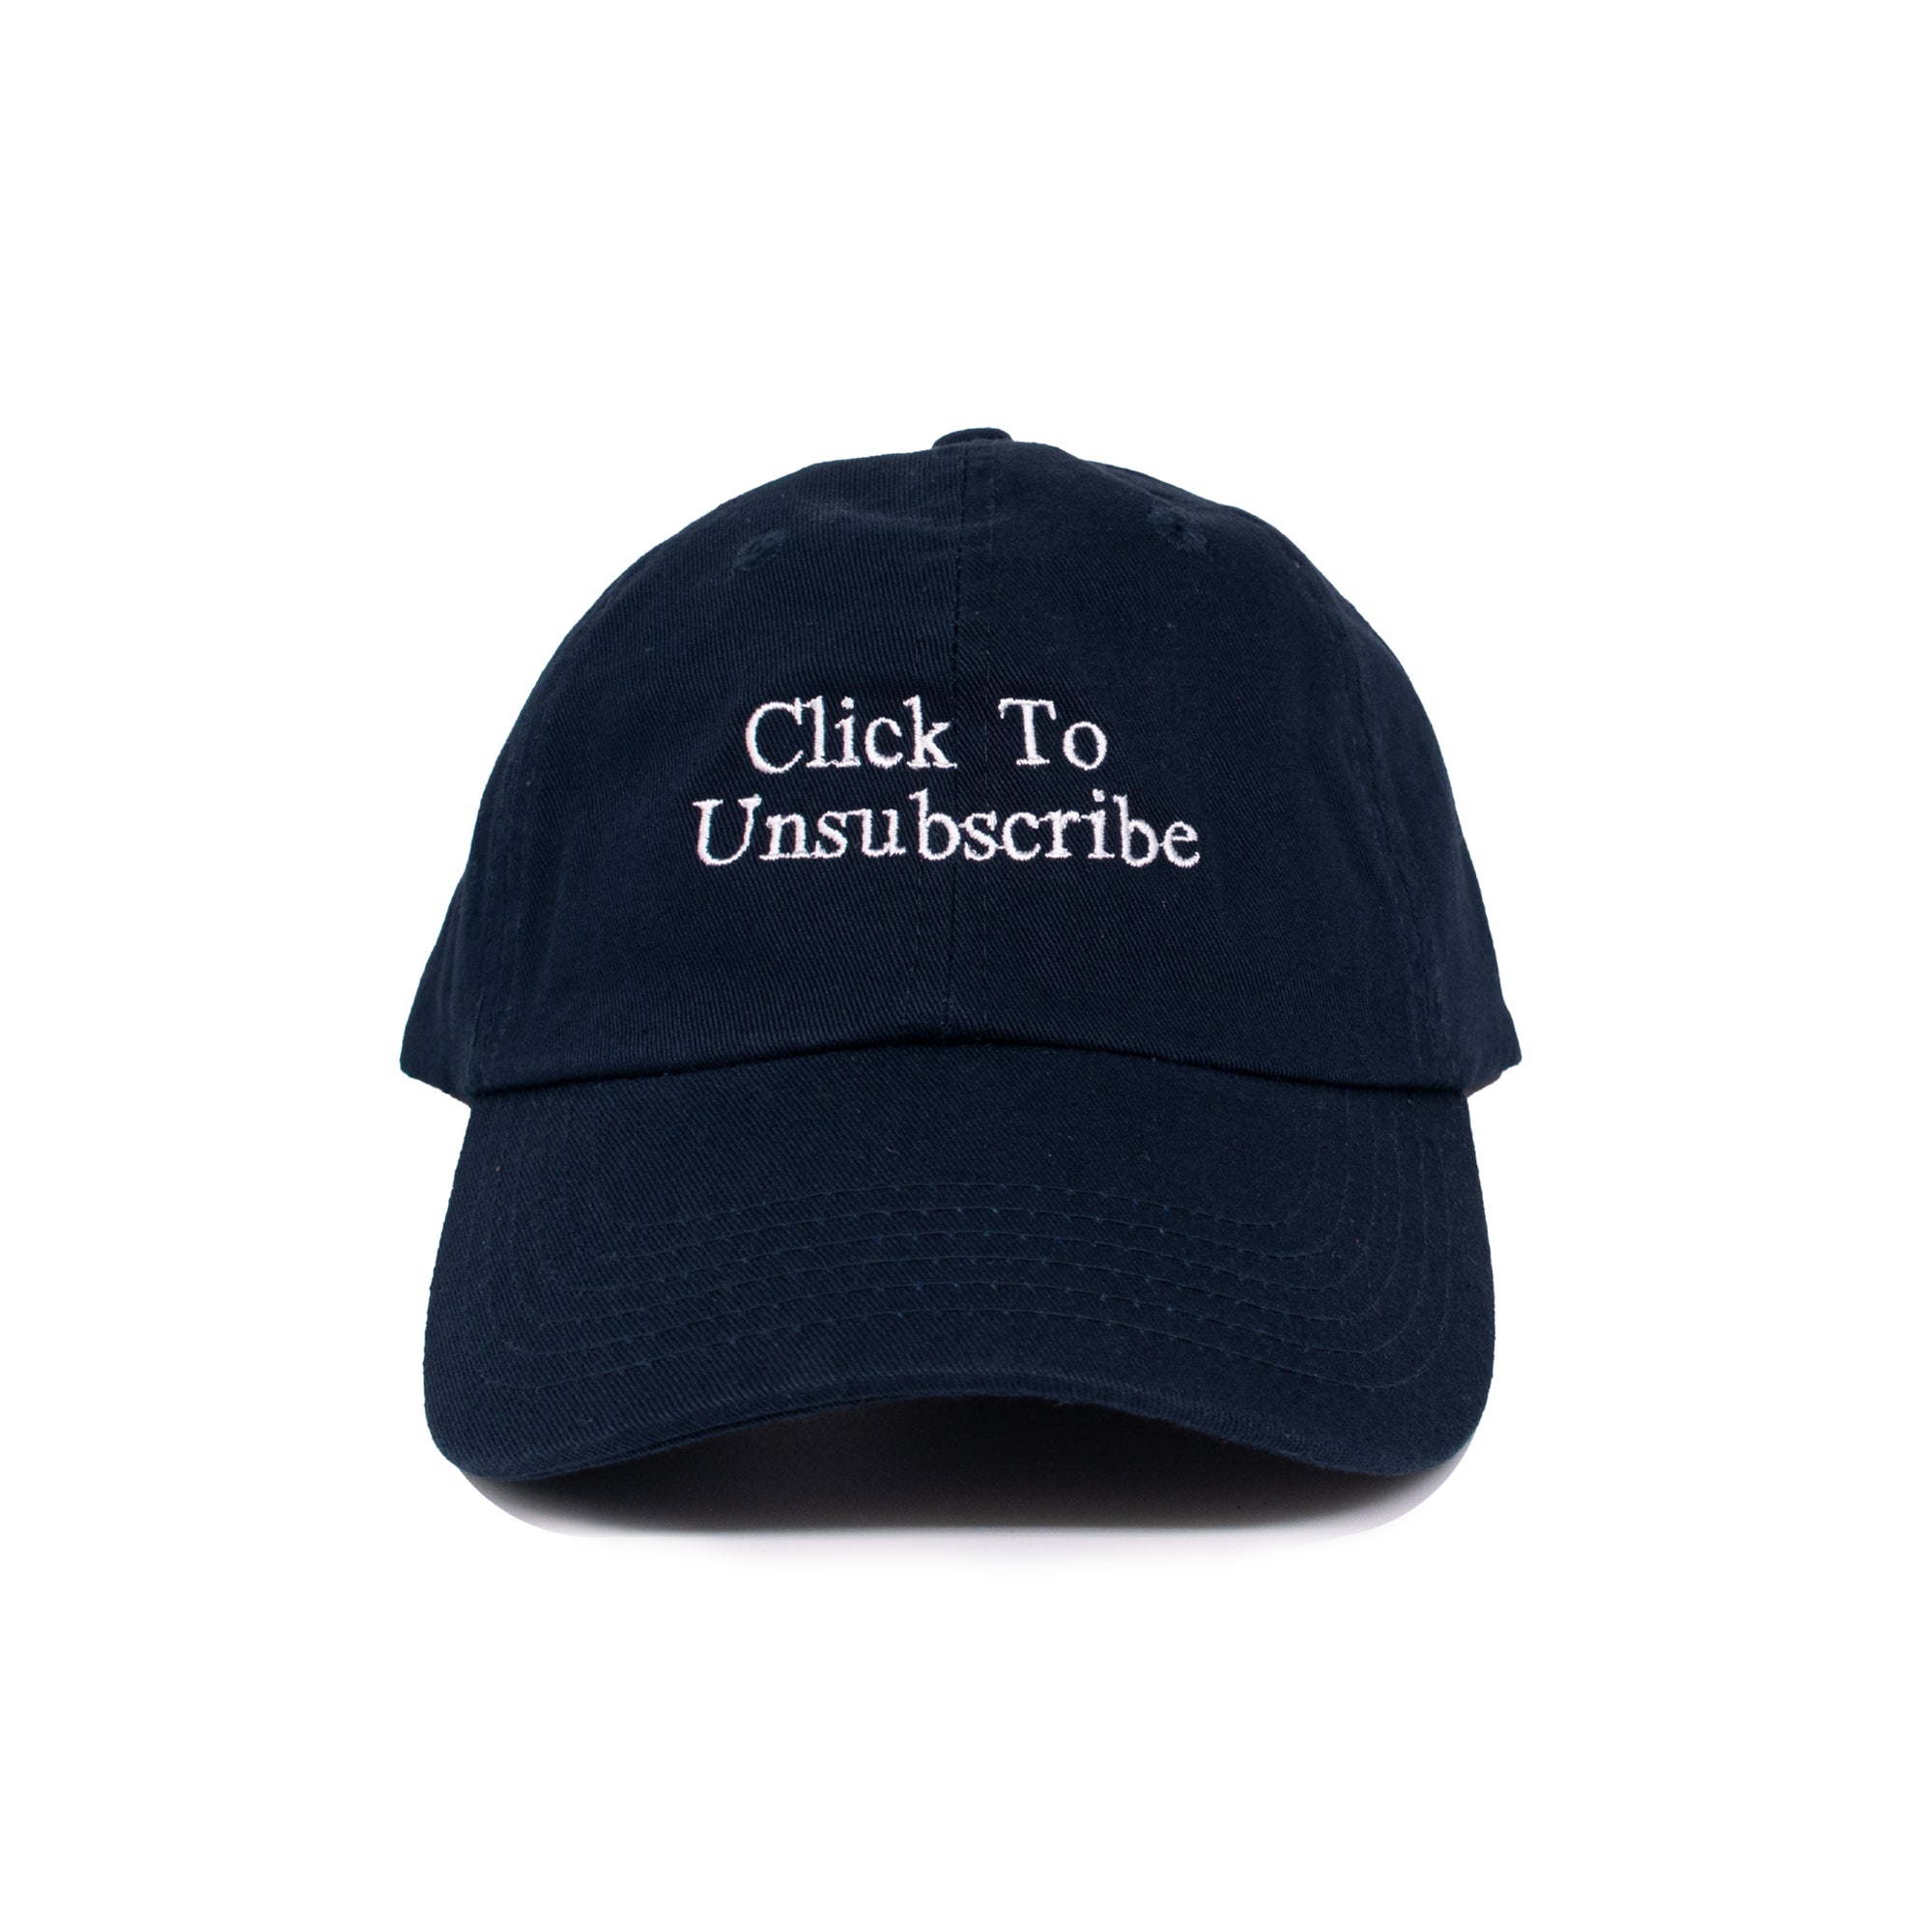 CLICK TO UNSUBSCRIBE